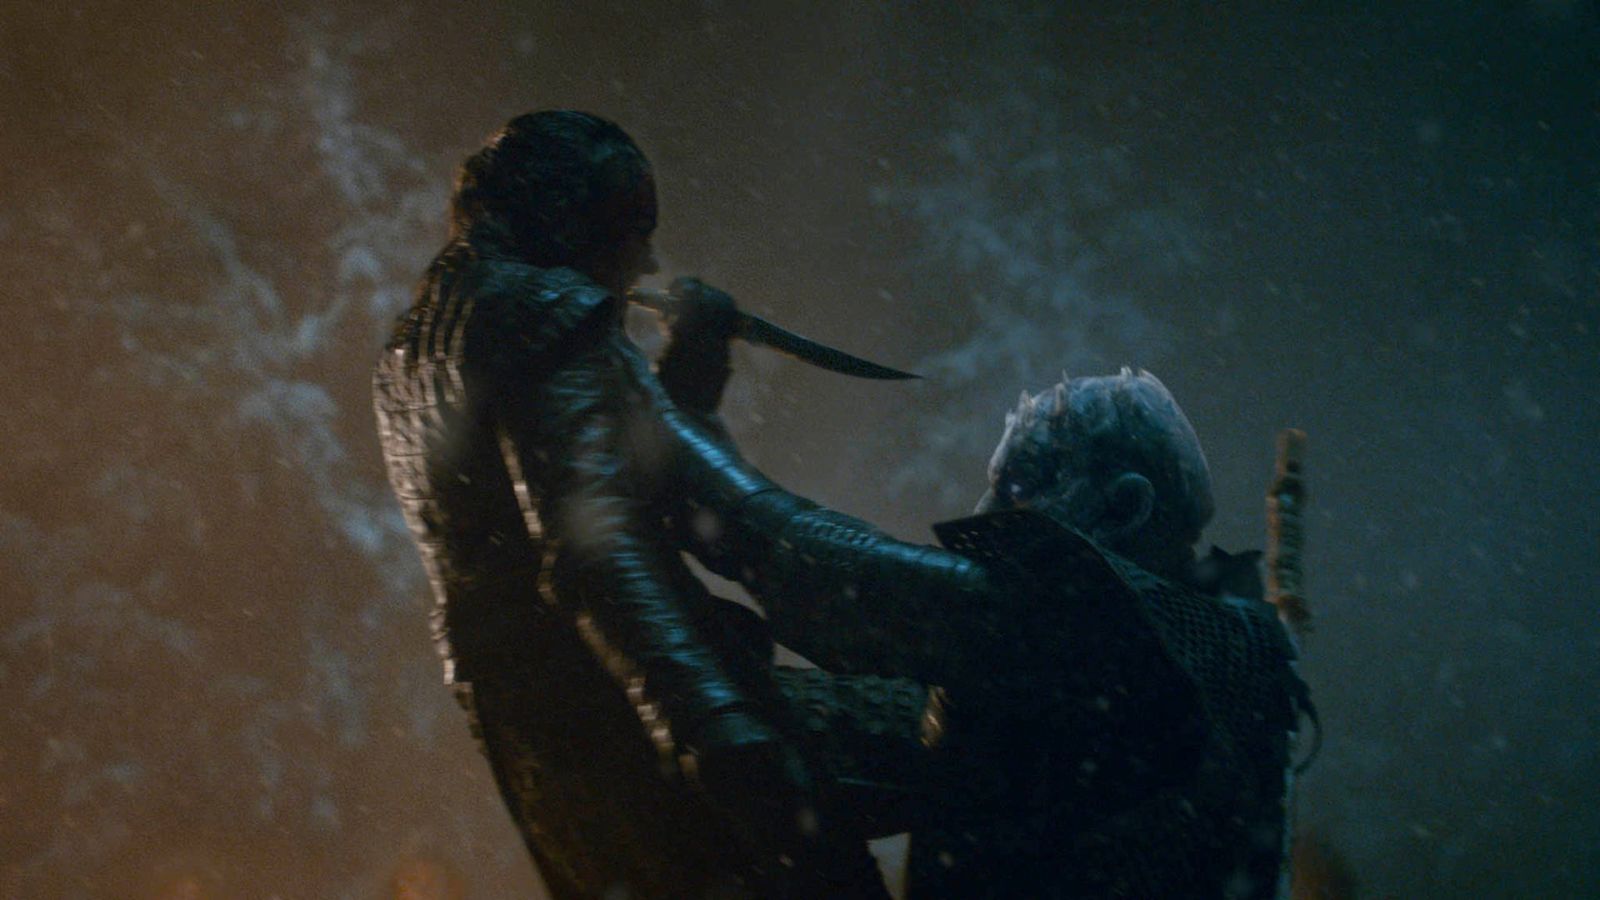 #AryaChallenge Explodes On Twitter As Fans Pay Homage To The Epic Night King Stabbing Moment